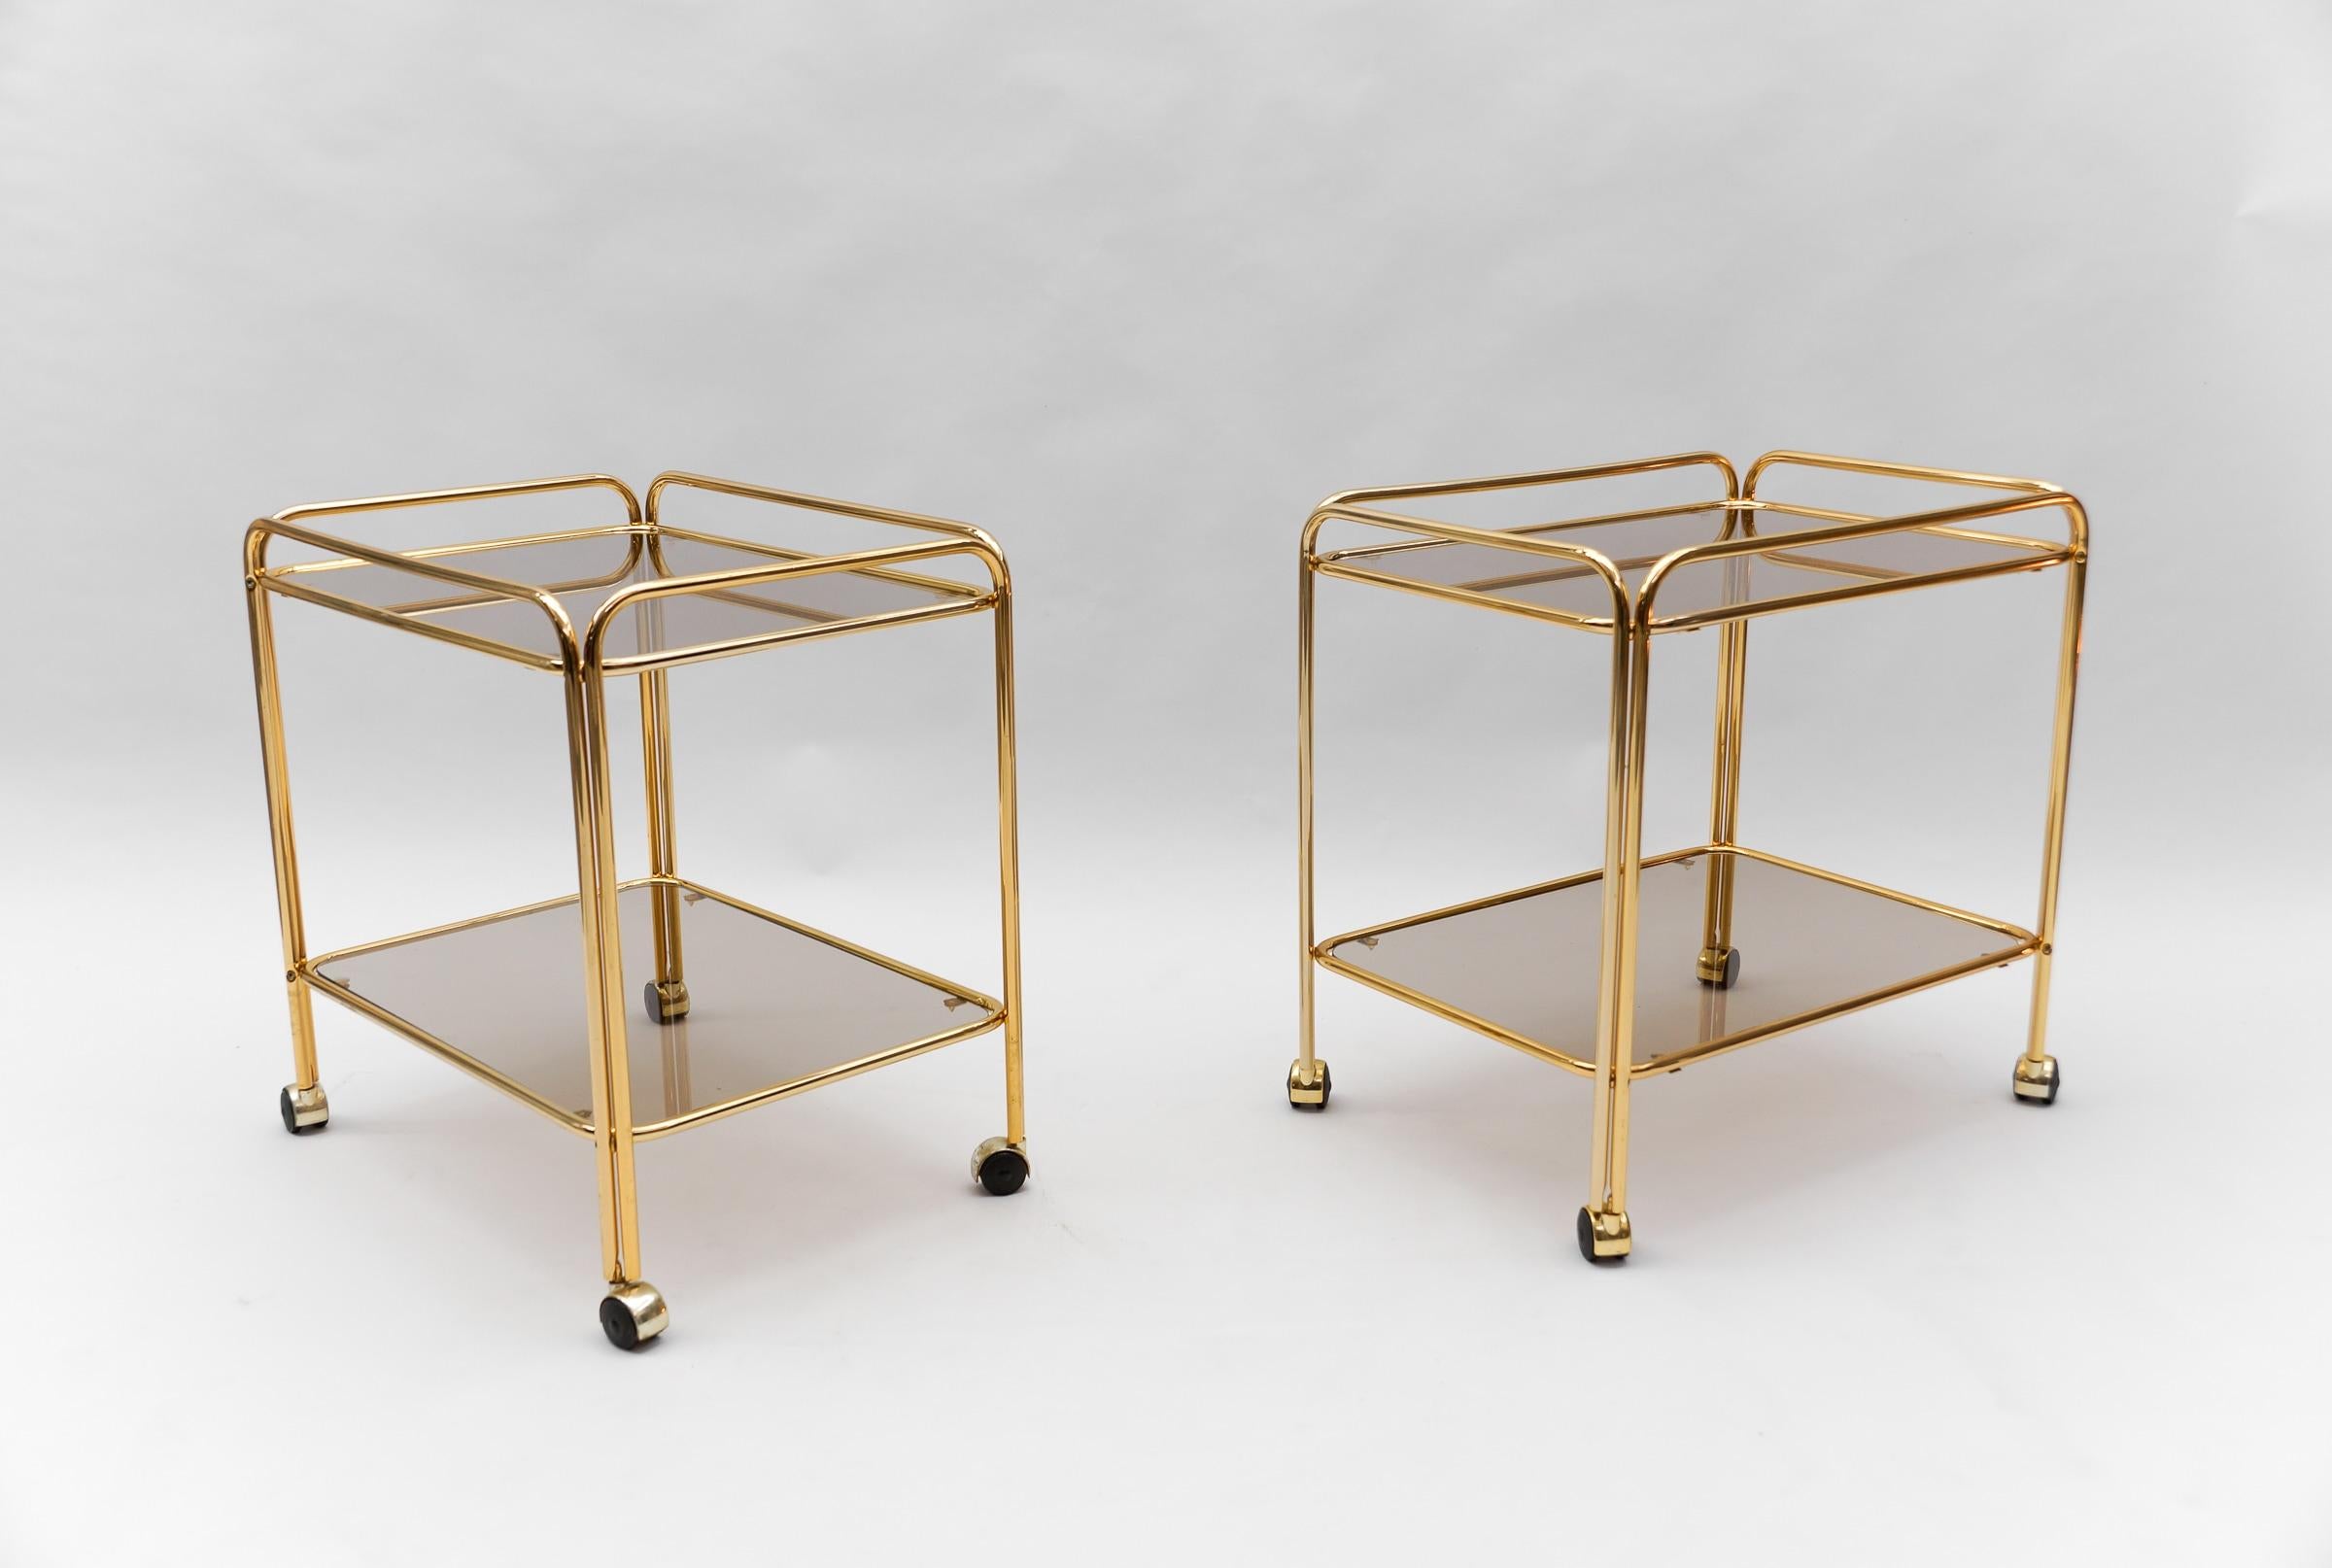 Beautiful faux bamboo serving table in heavy brass with smoked grey glass plates by Maison Baguès Paris.
Maison Baguès is renowned for fine brass objects and lights since its establishment in 1860.
The idiosyncratic genius Armand-Albert Rateau used